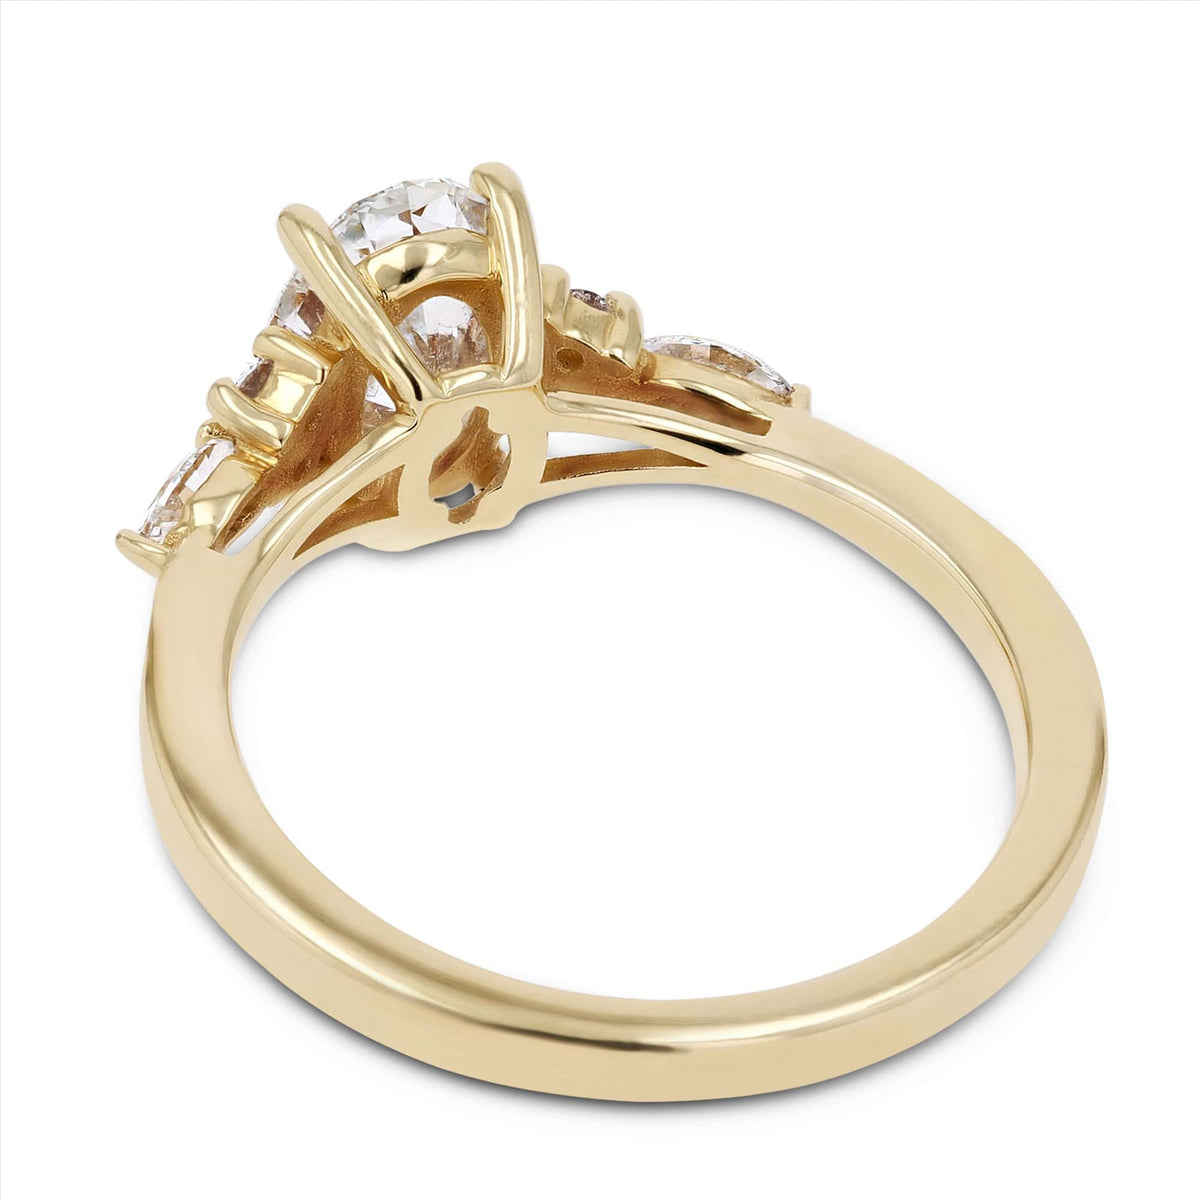 Shown with 1ct Oval Cut Lab Grown Diamond in 14K Yellow Gold